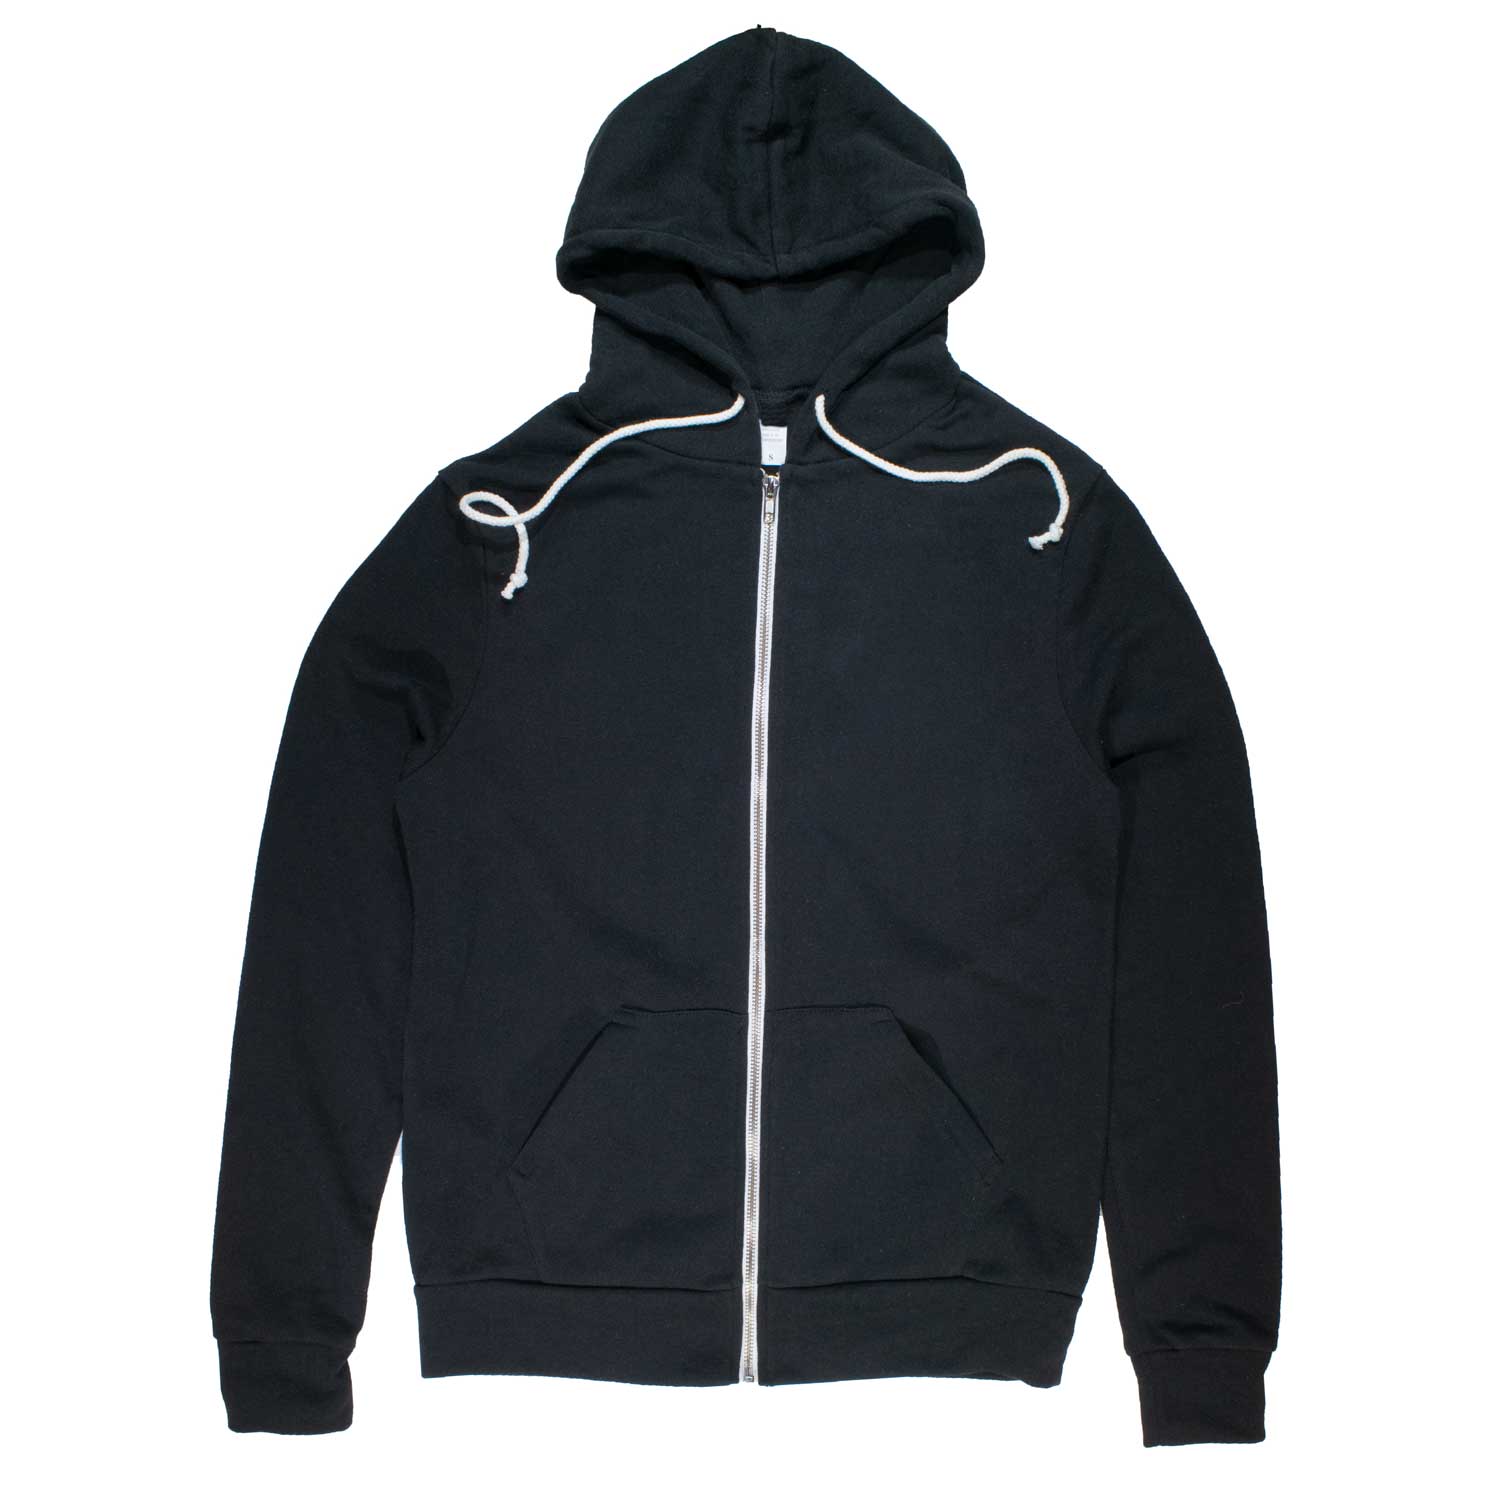 Extra Soft Zip Up Hoodie | Ethically Sourced USA Made Fleece Sweatshirt | SOLID THREADS